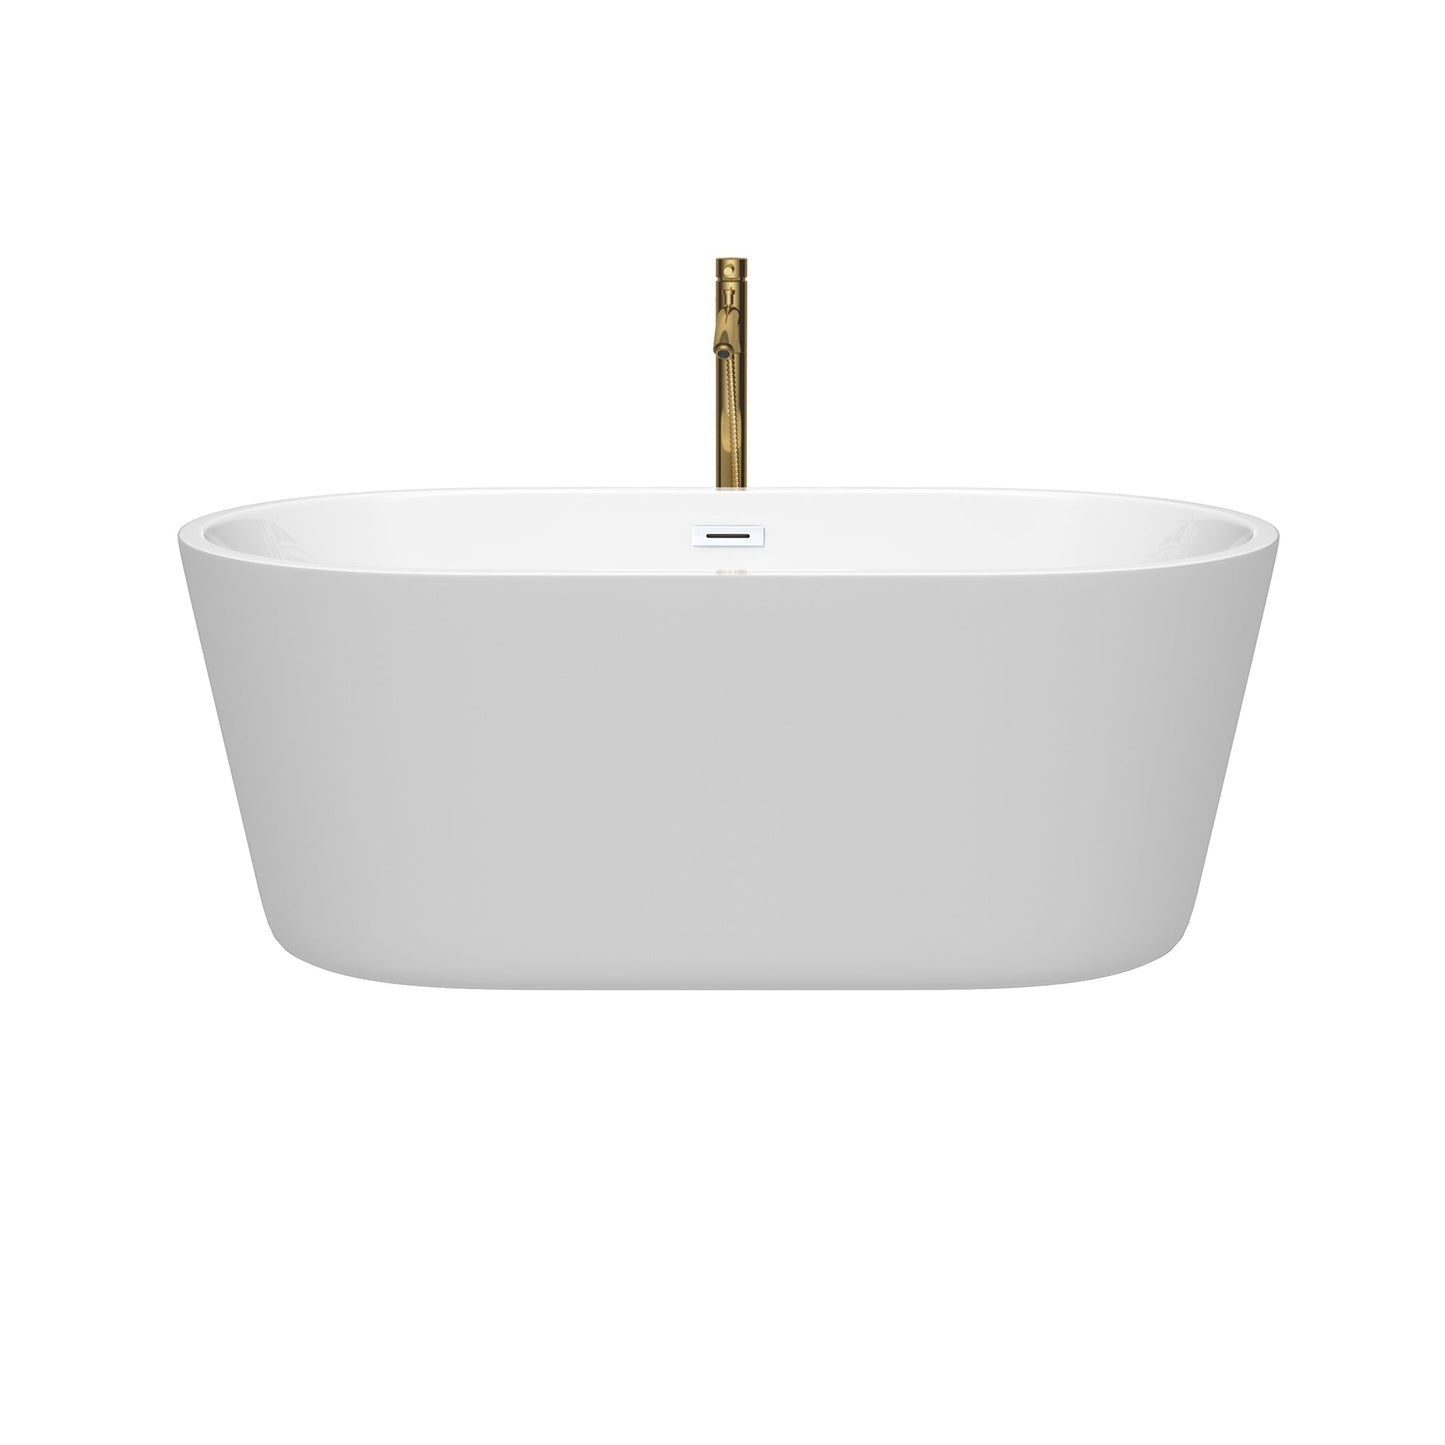 Wyndham Collection Carissa 60" Freestanding Bathtub in White With Shiny White Trim and Floor Mounted Faucet in Brushed Gold